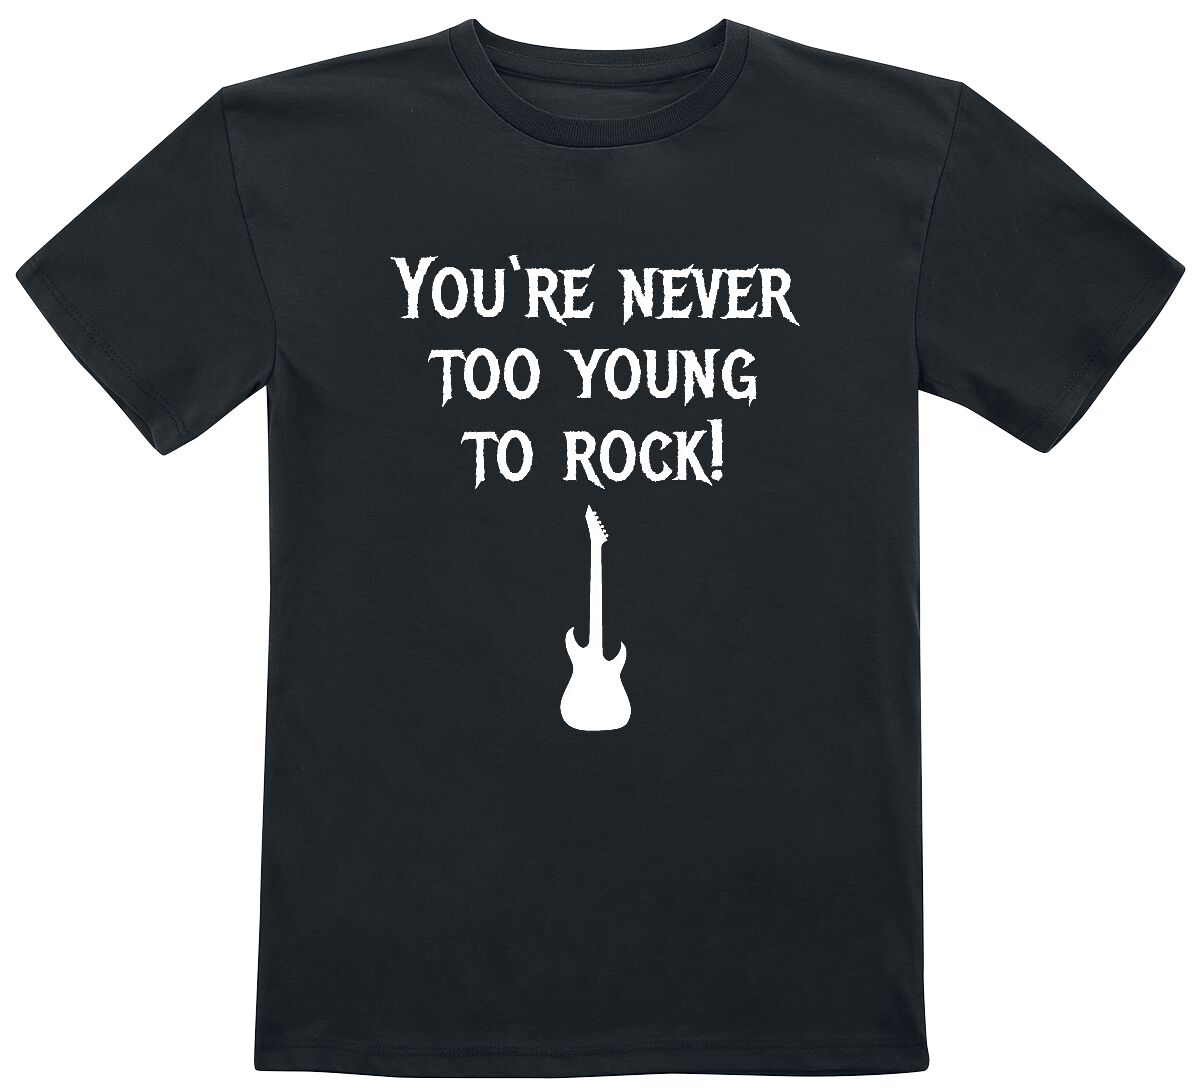 Sprüche Kids - You're Never Too Young To Rock! T-Shirt schwarz in 164